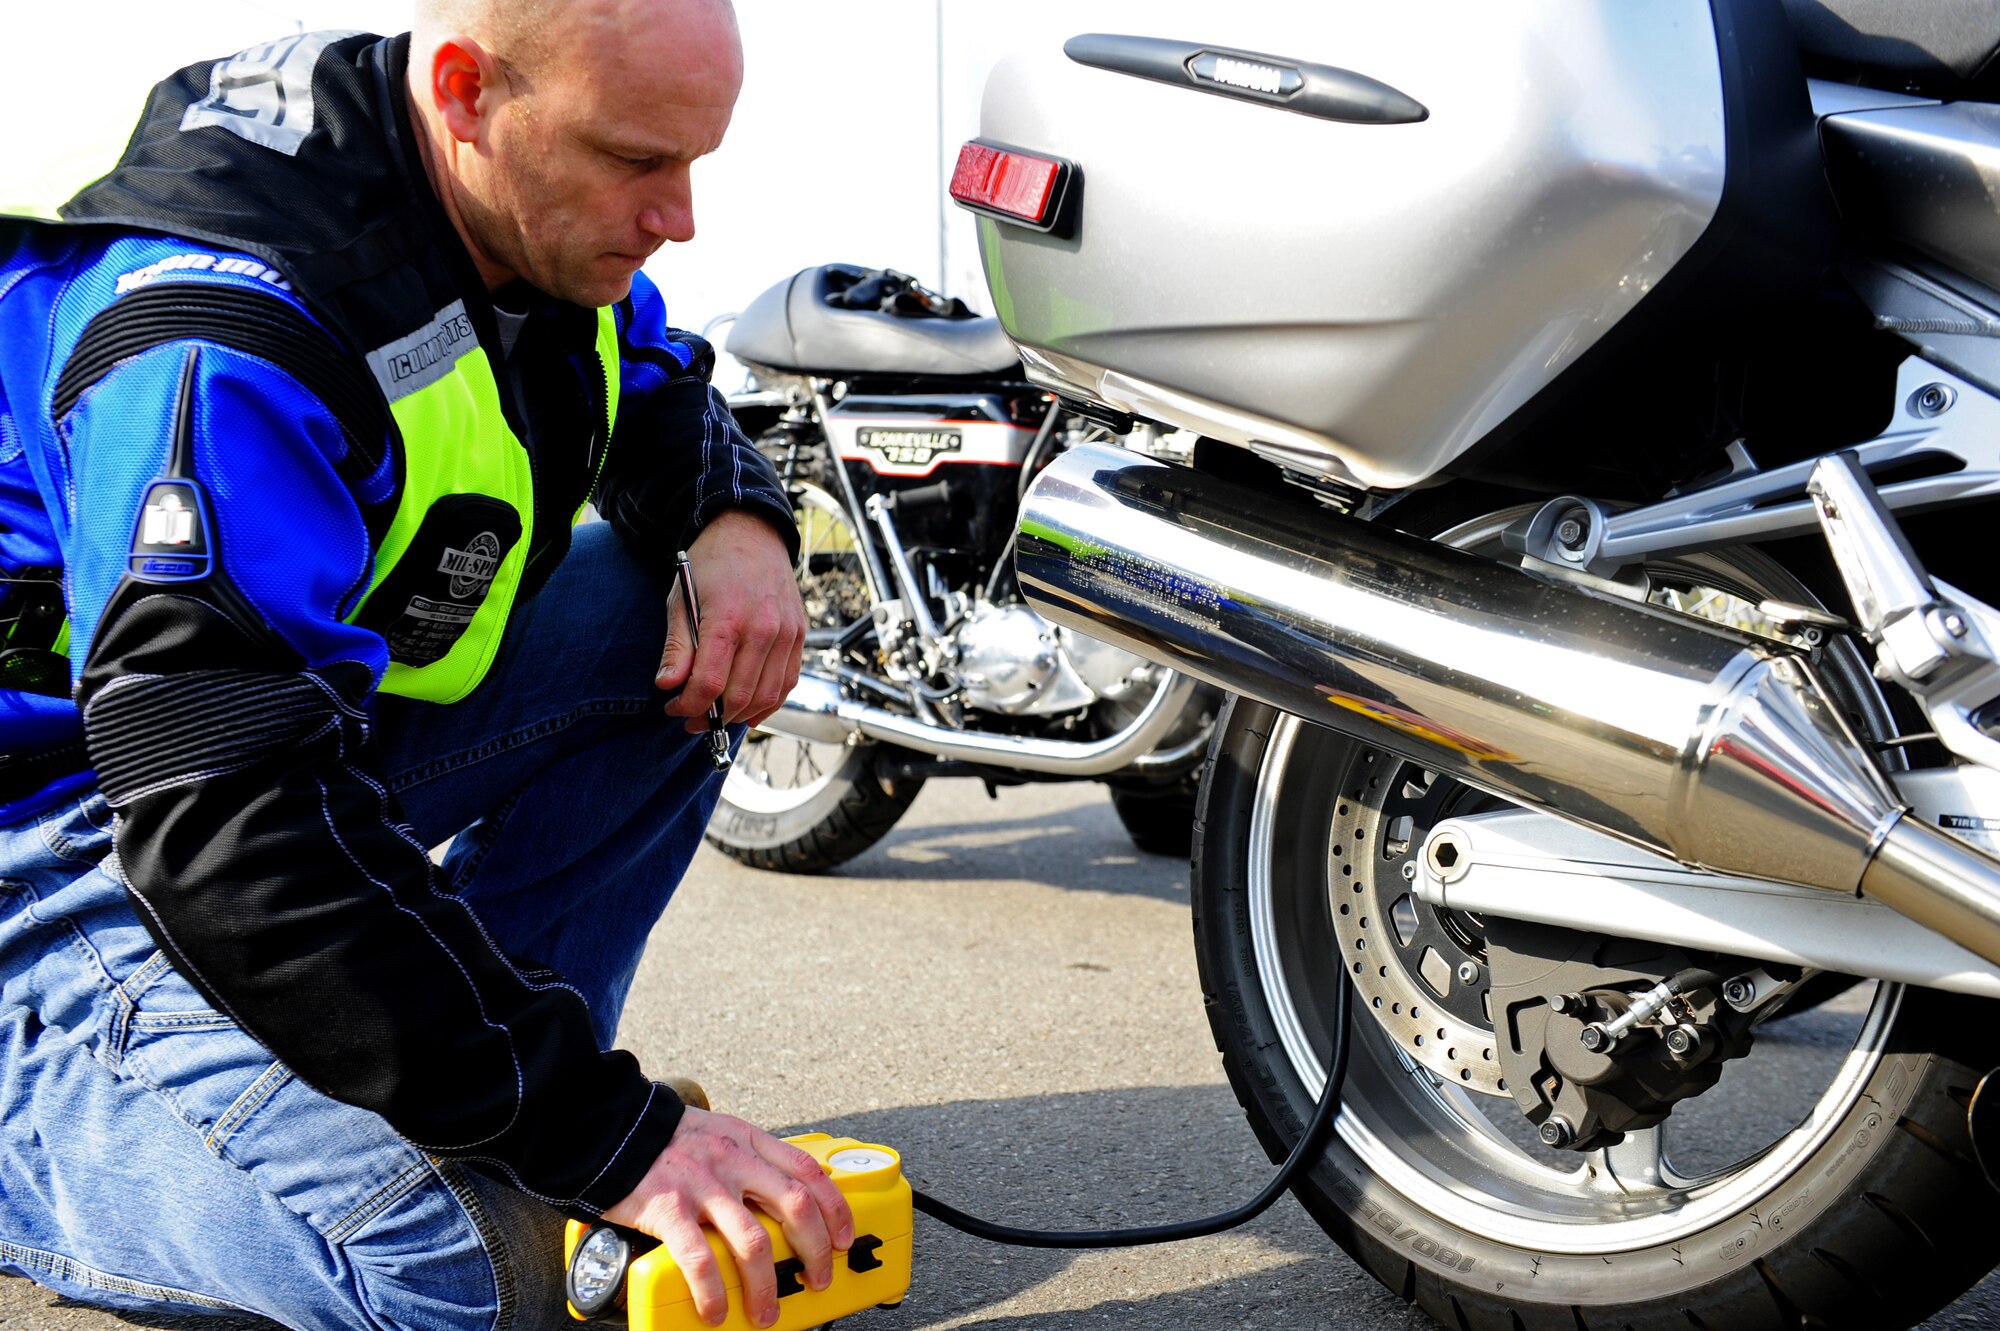 Air Force Chief Master Sgt. William Shields, 86th Aircraft Maintenance Squadron superintendent, checks his motorcycle tire pressure using an air compressor during Motorcycle Safety Day, Ramstein Air Base, Germany, March 17, 2012. The safety day was held for the 86th Maintenance Group to promote safe motorcycle practices and raise camaraderie amongst the participants. (U.S. Air Force photo/Airman Brea Miller)